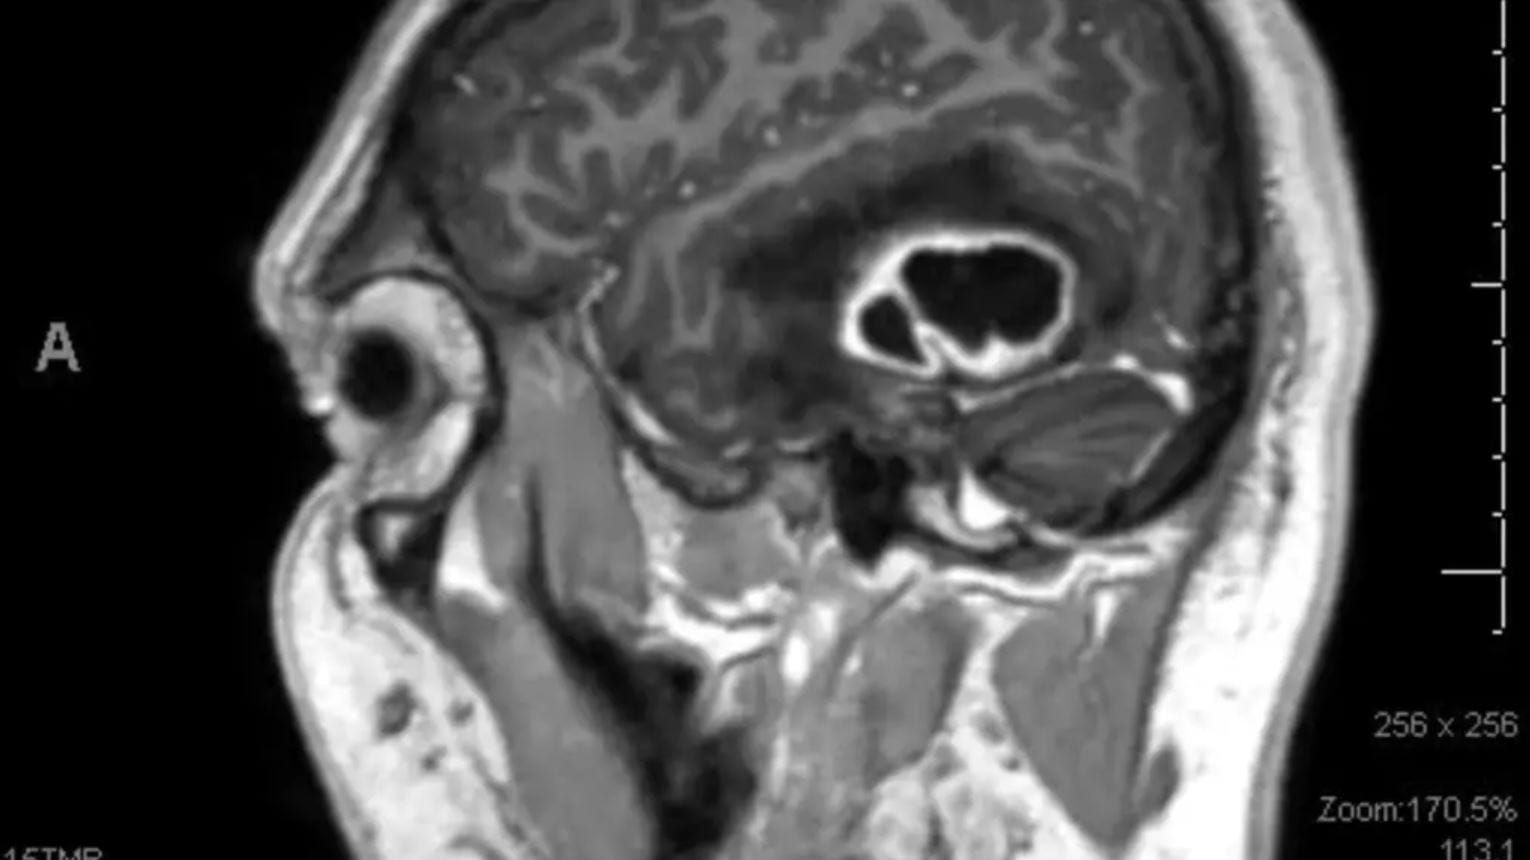 New MRI techniques mean fewer brain surgeries like the one that removed this apple-sized abscess